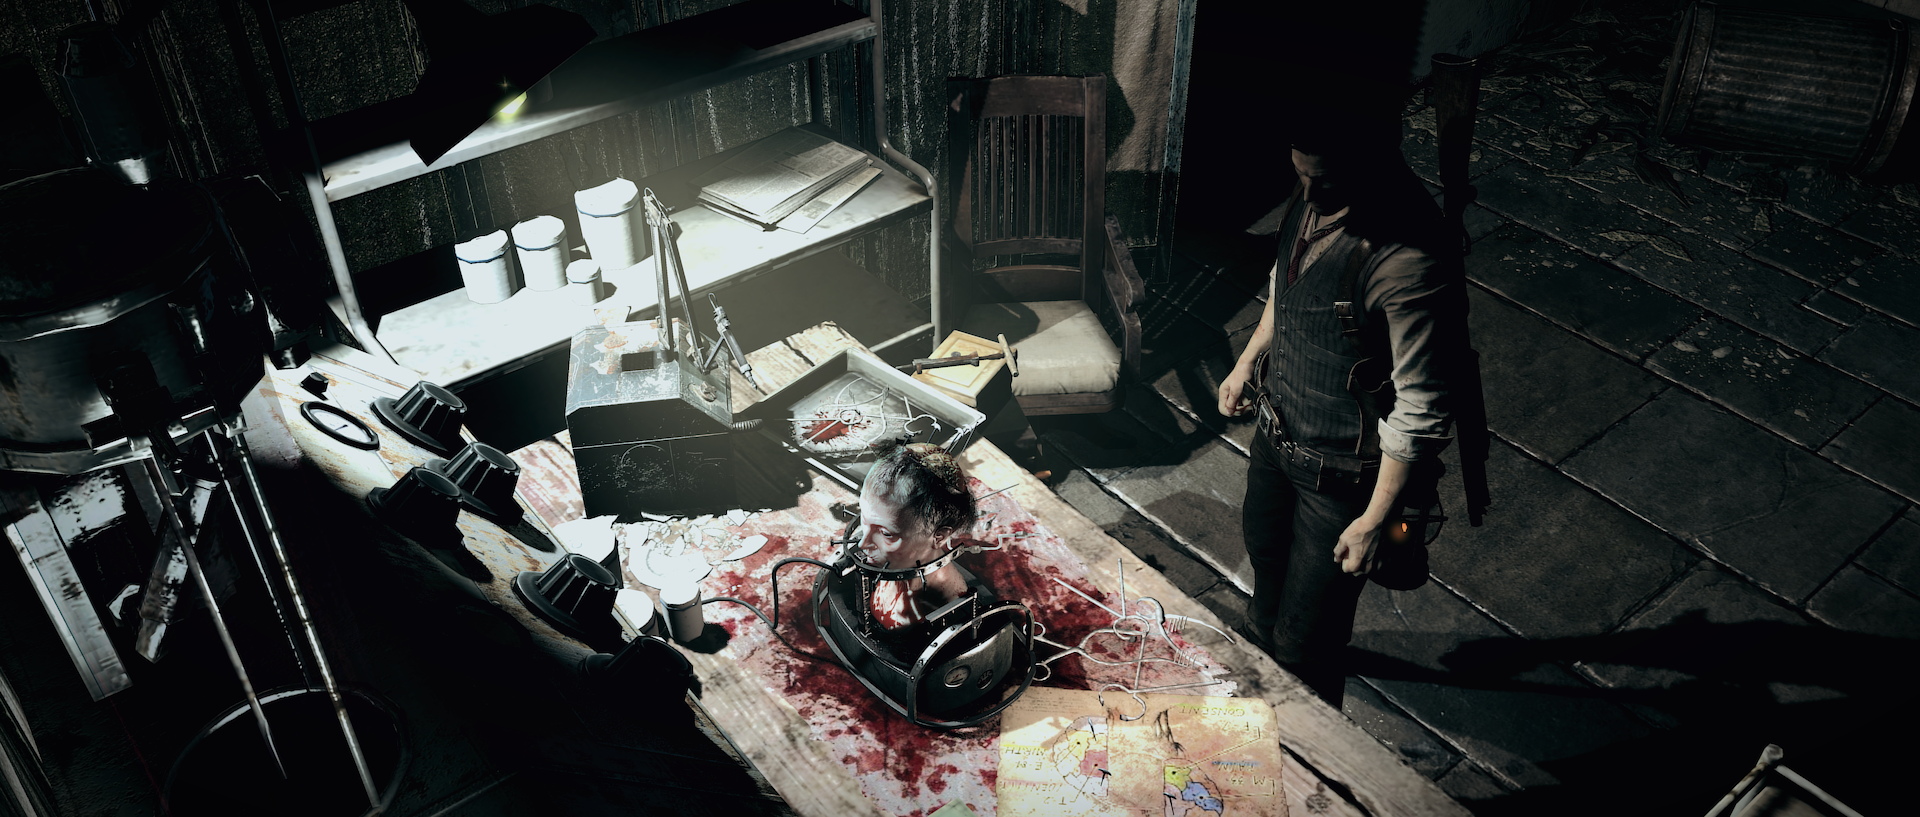 The Evil Within Made Me Want To Throw Up